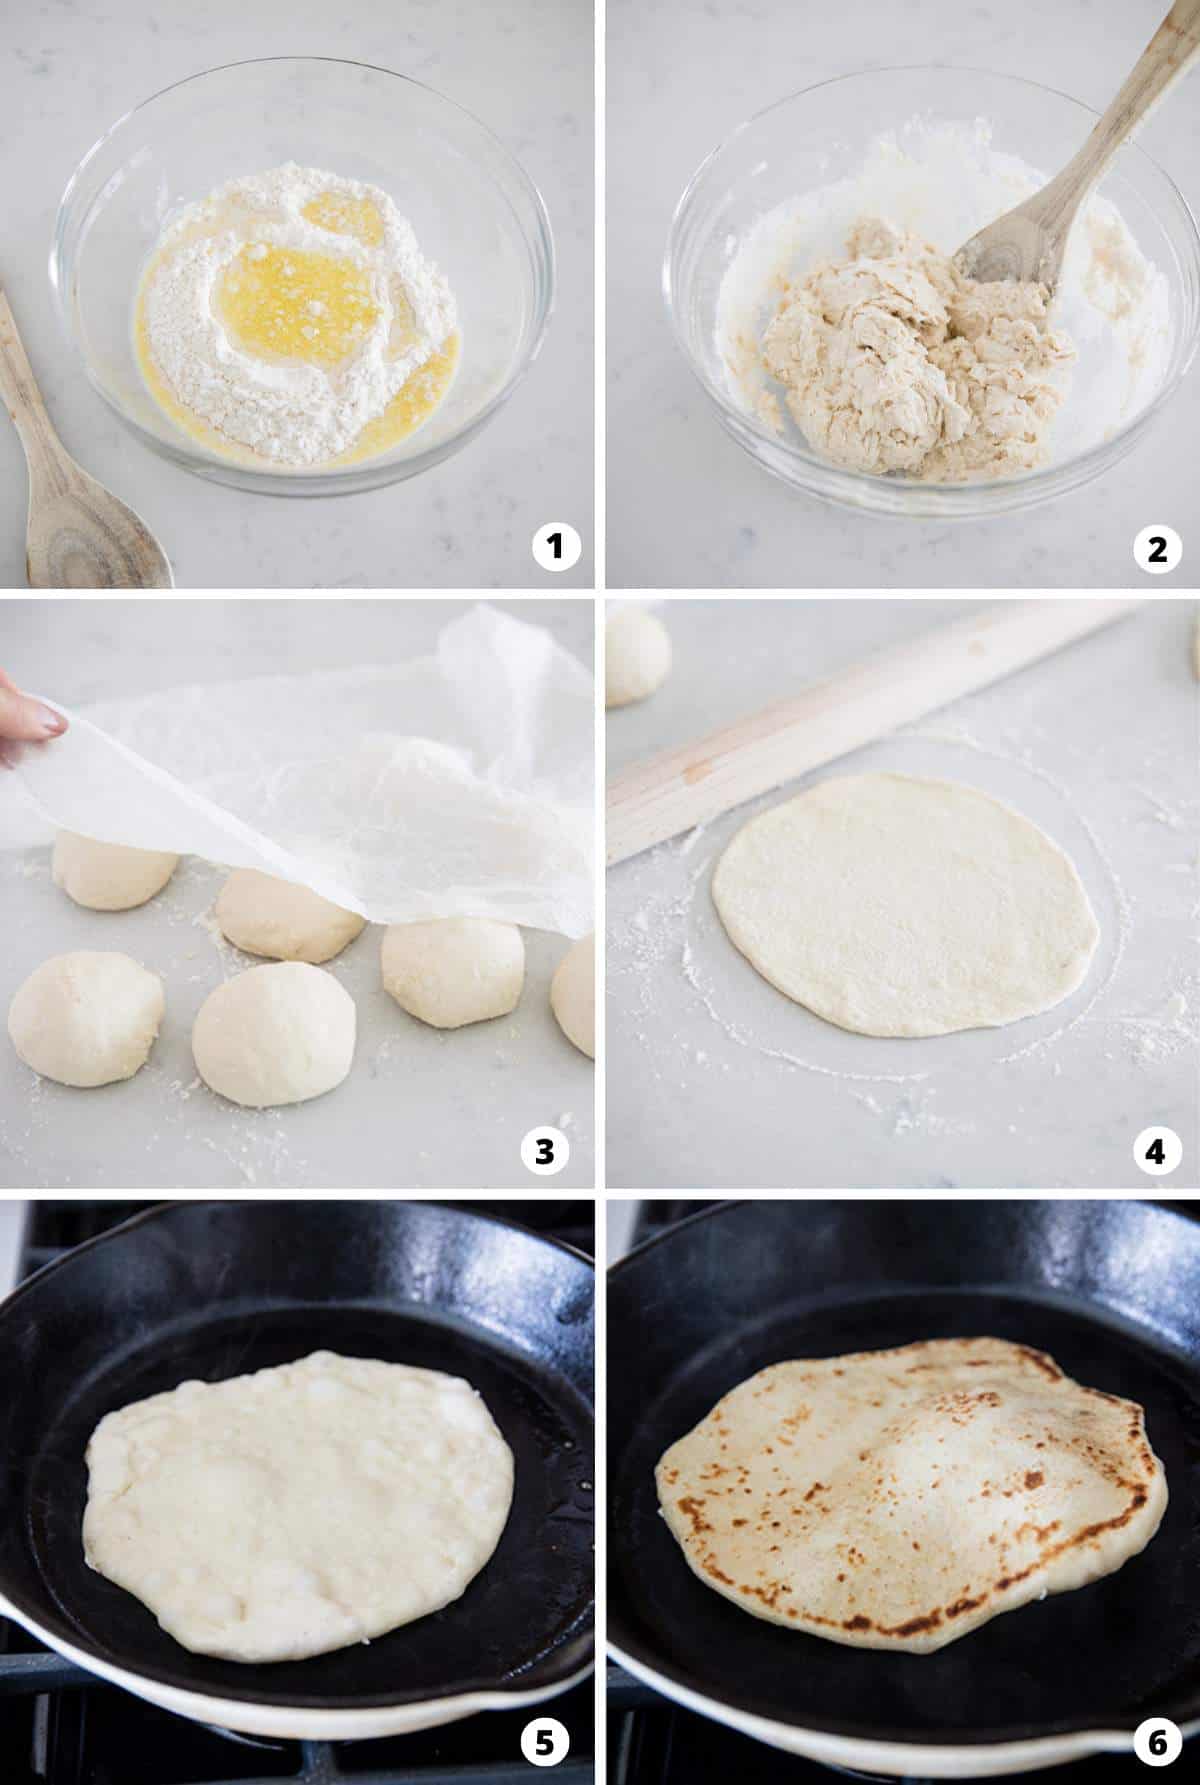 Showing how to make naan in a 6 step collage.